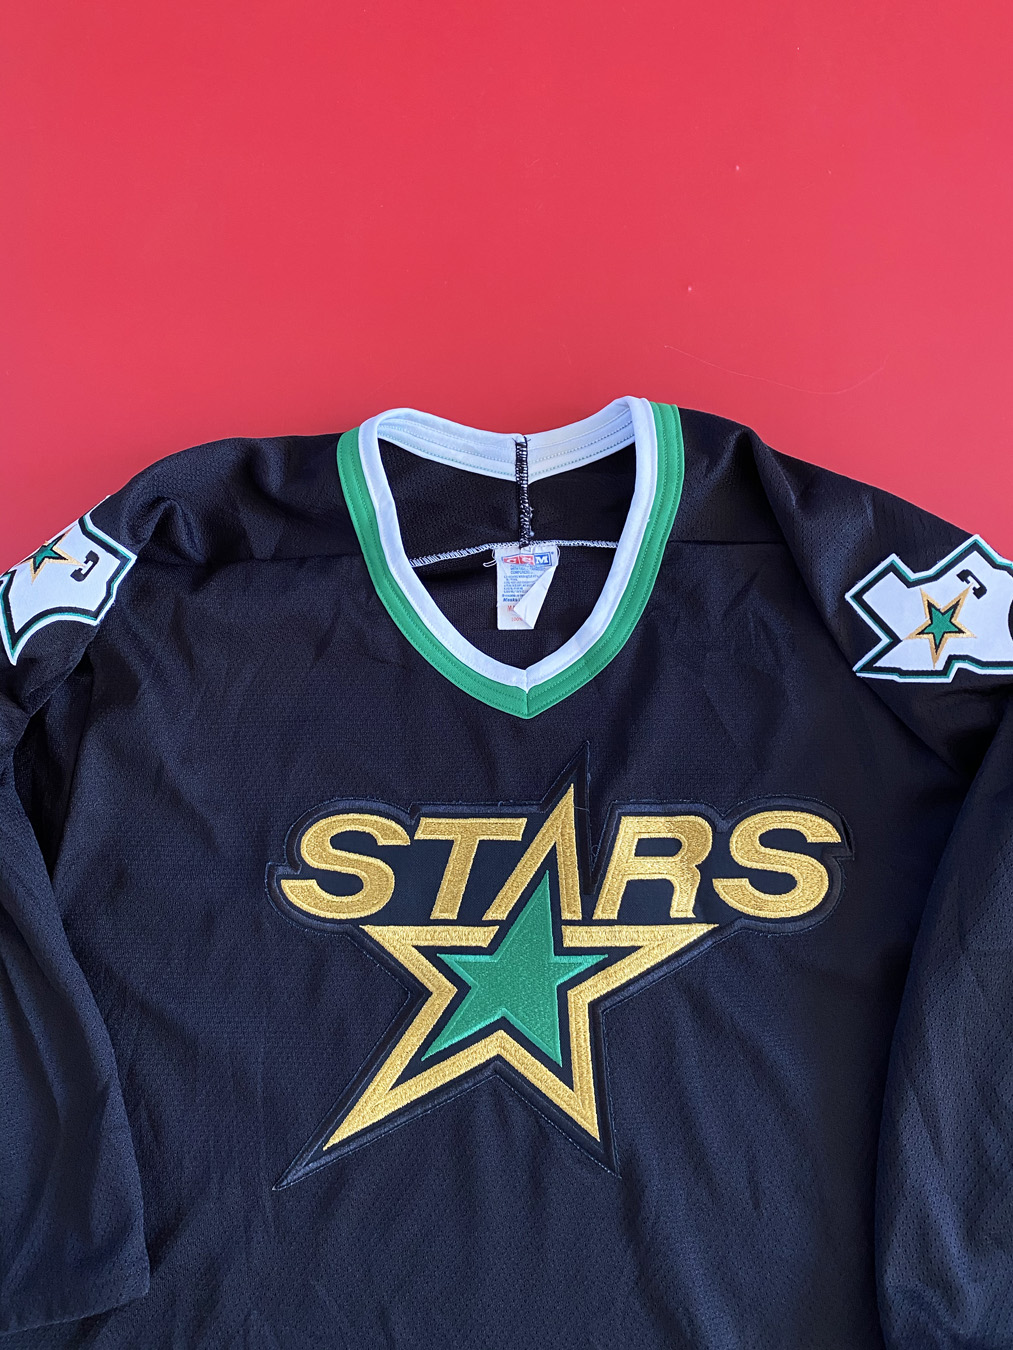 NHL Official CCM Youth S/M Dallas Stars Green Black Ice Hockey Jersey Mint